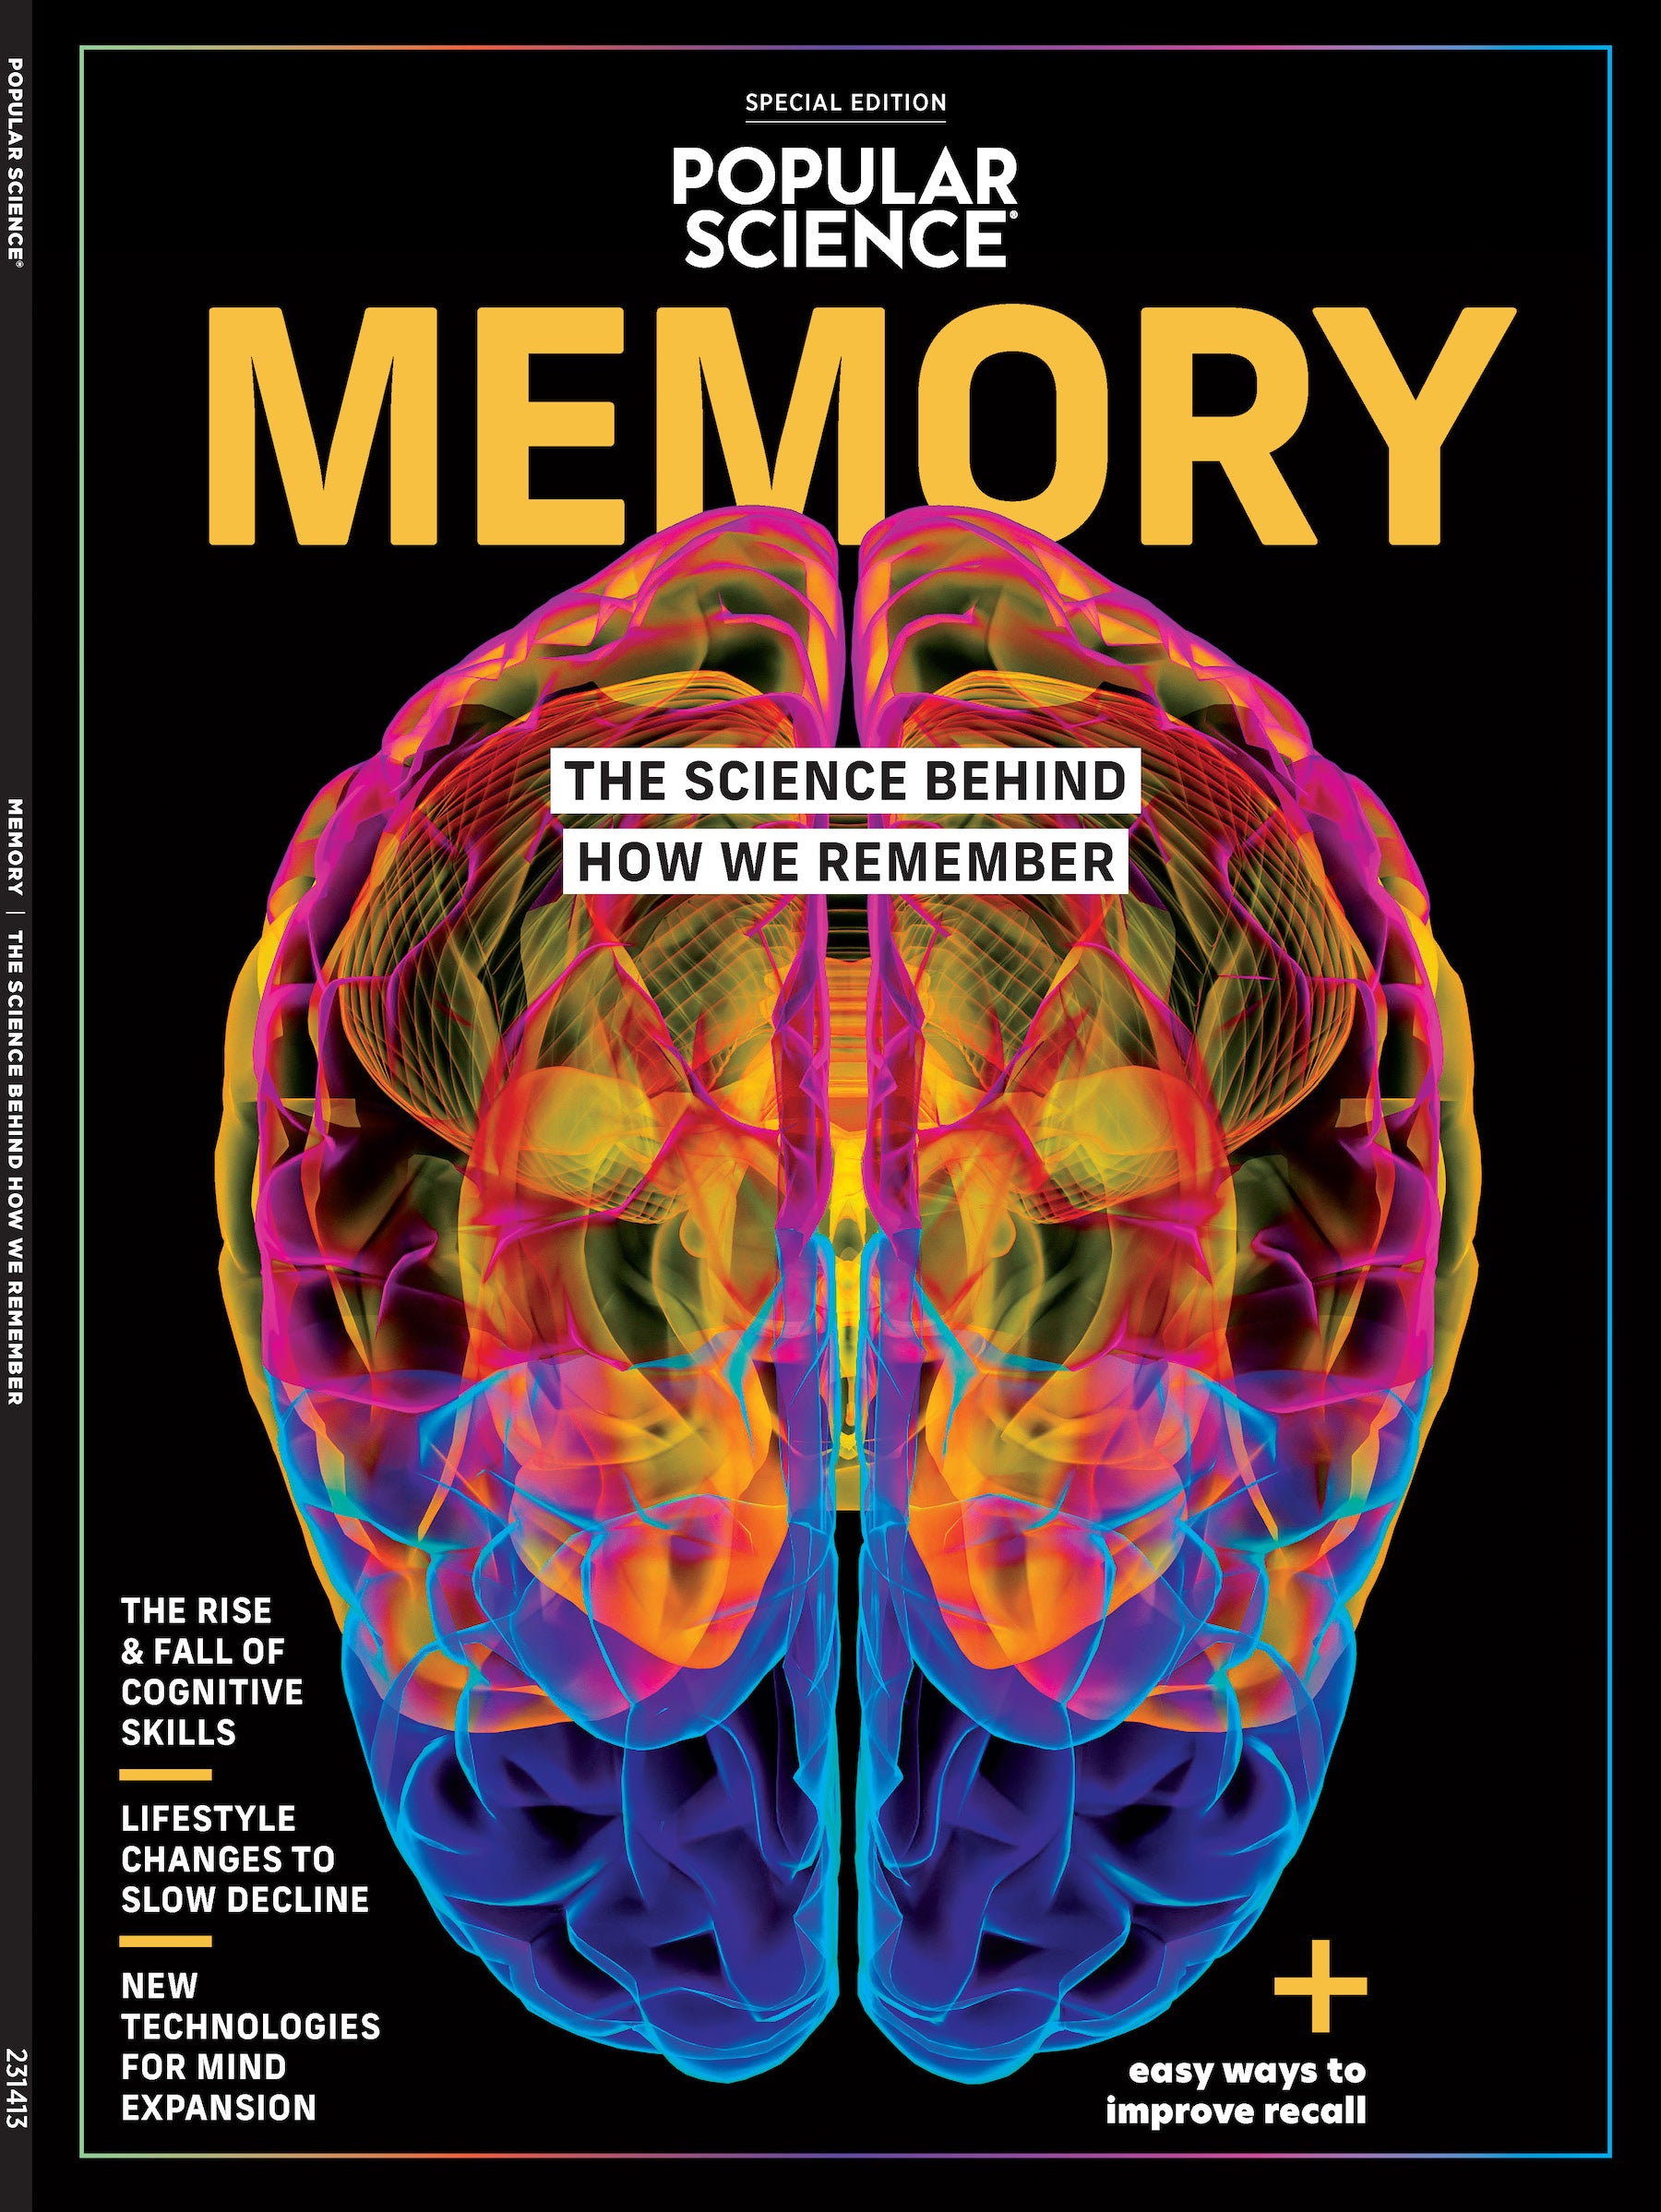 The science behind memory glitches, Psychology